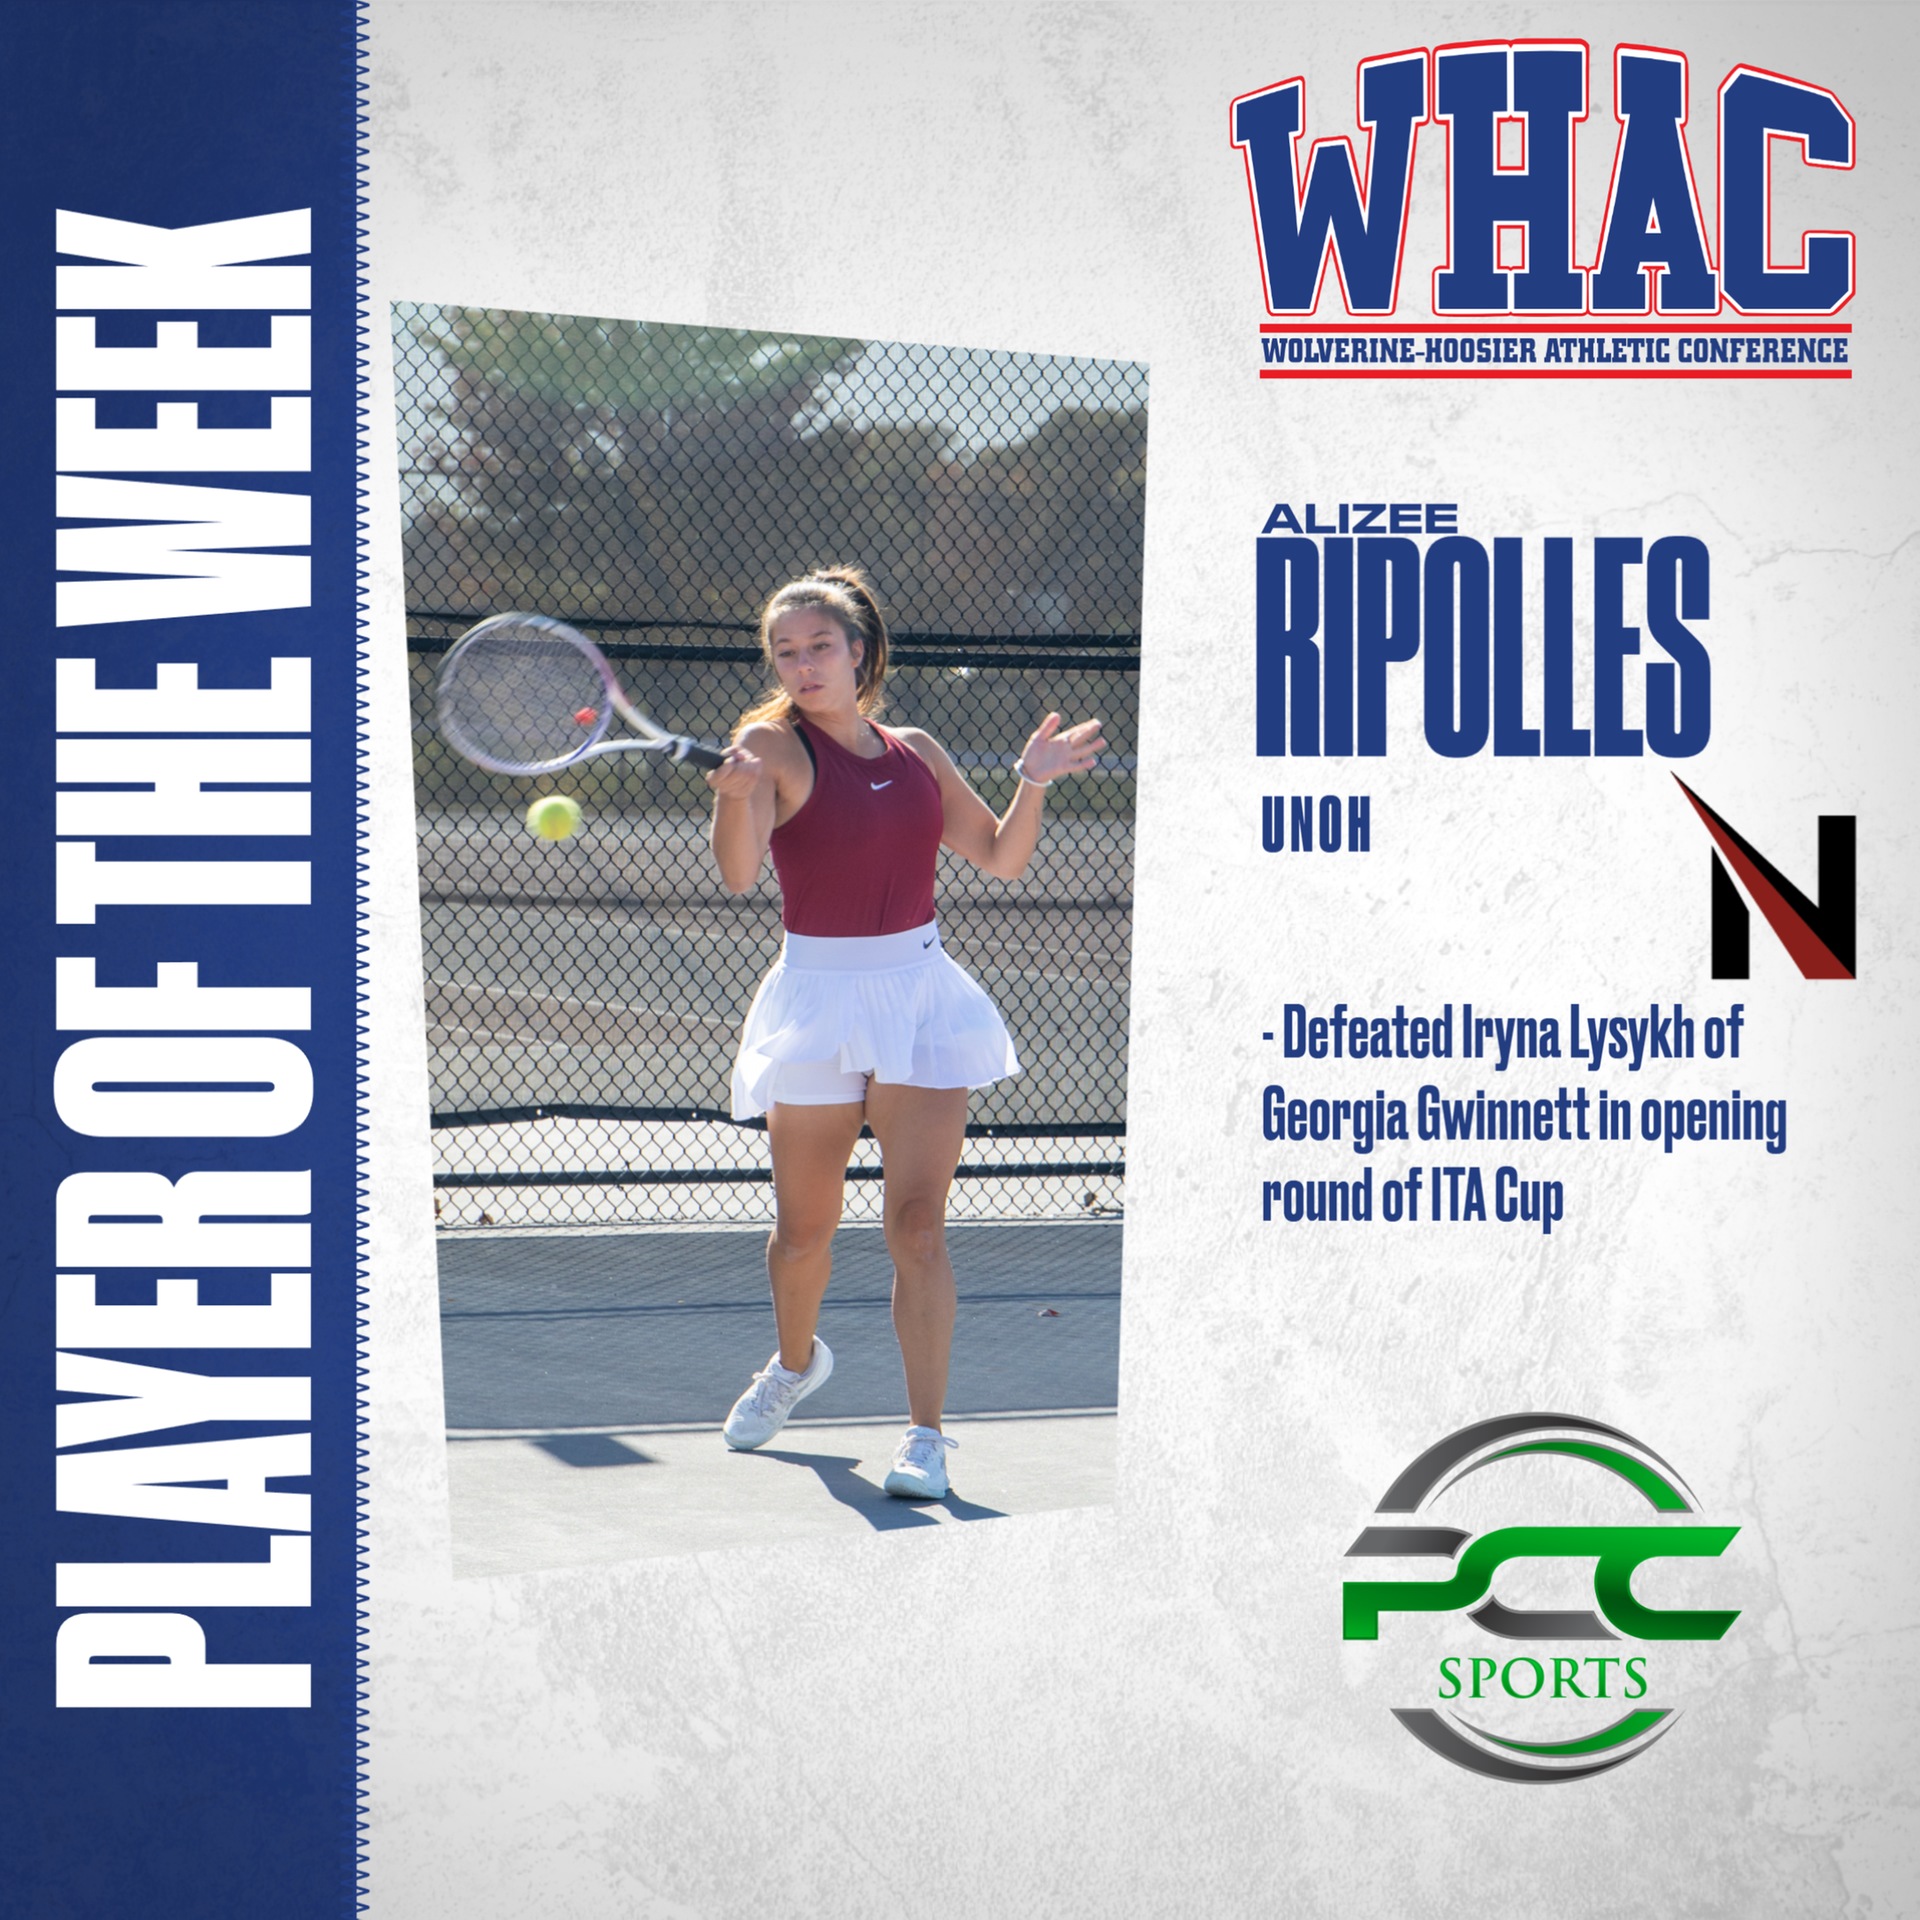 UNOH's Ripolles named Player of the Week